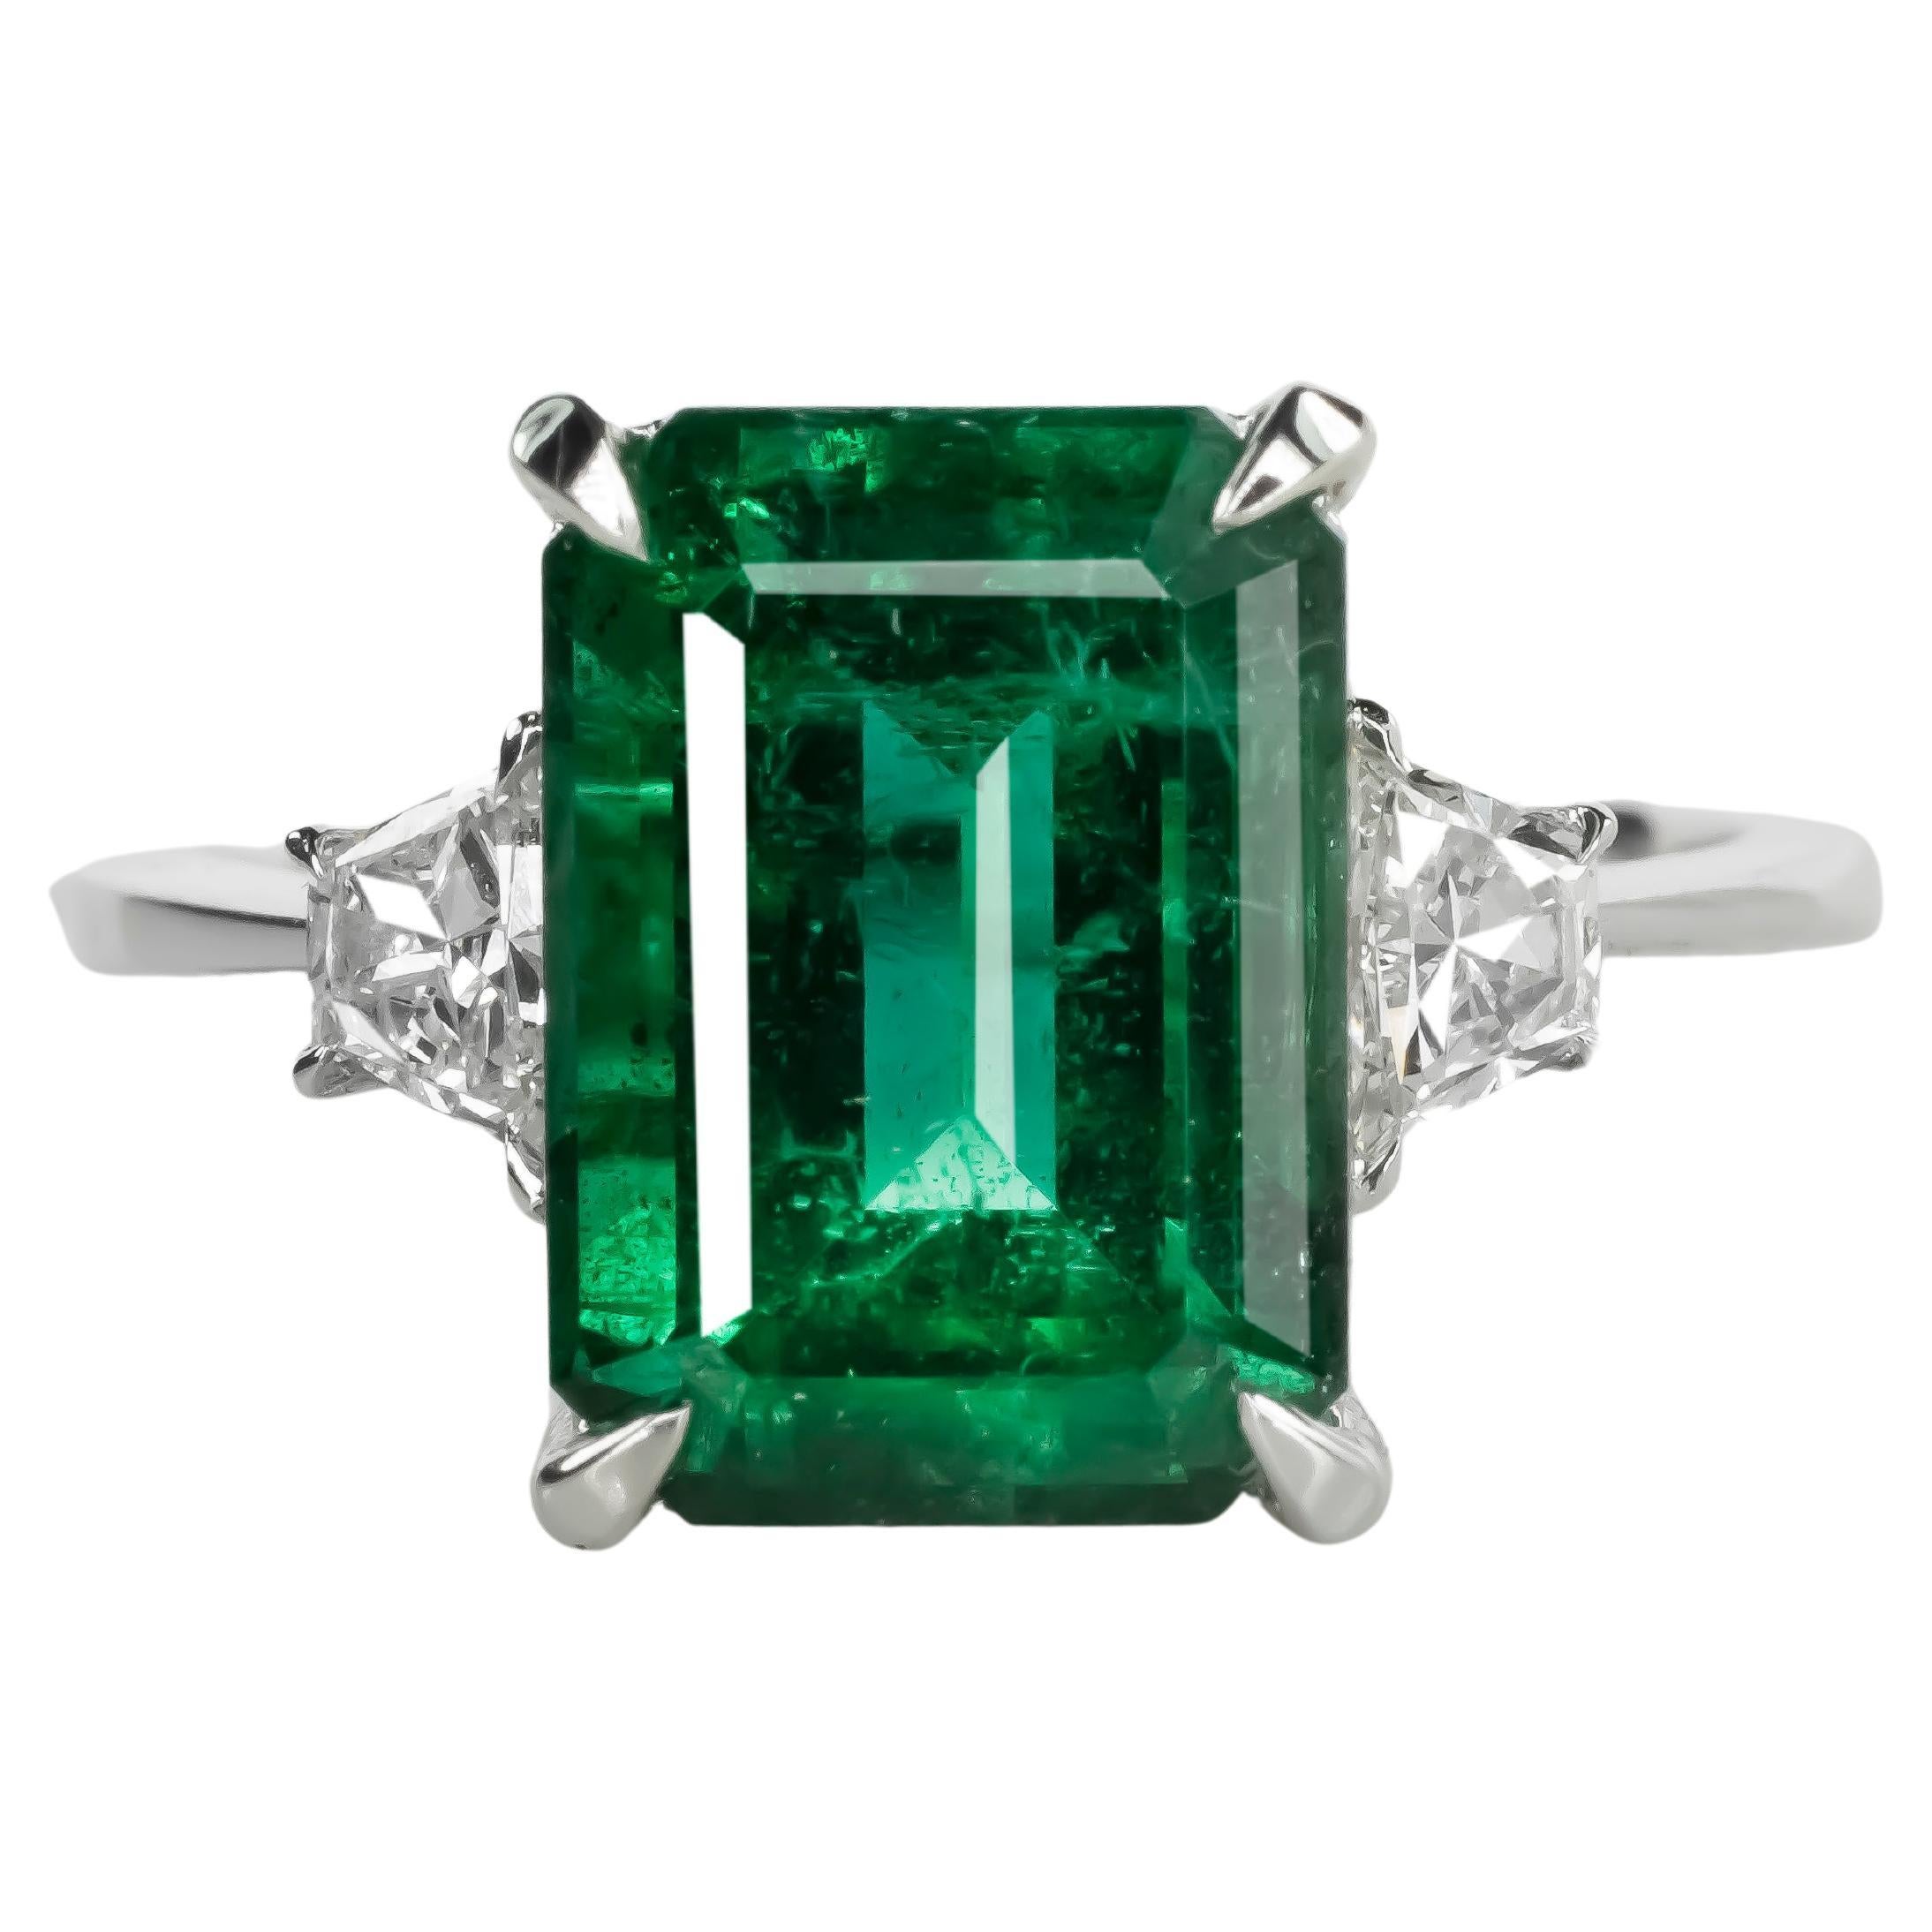 AGL Certified 13 Carat Emerald MINOR OIL Diamond Ring MADE IN ITALY